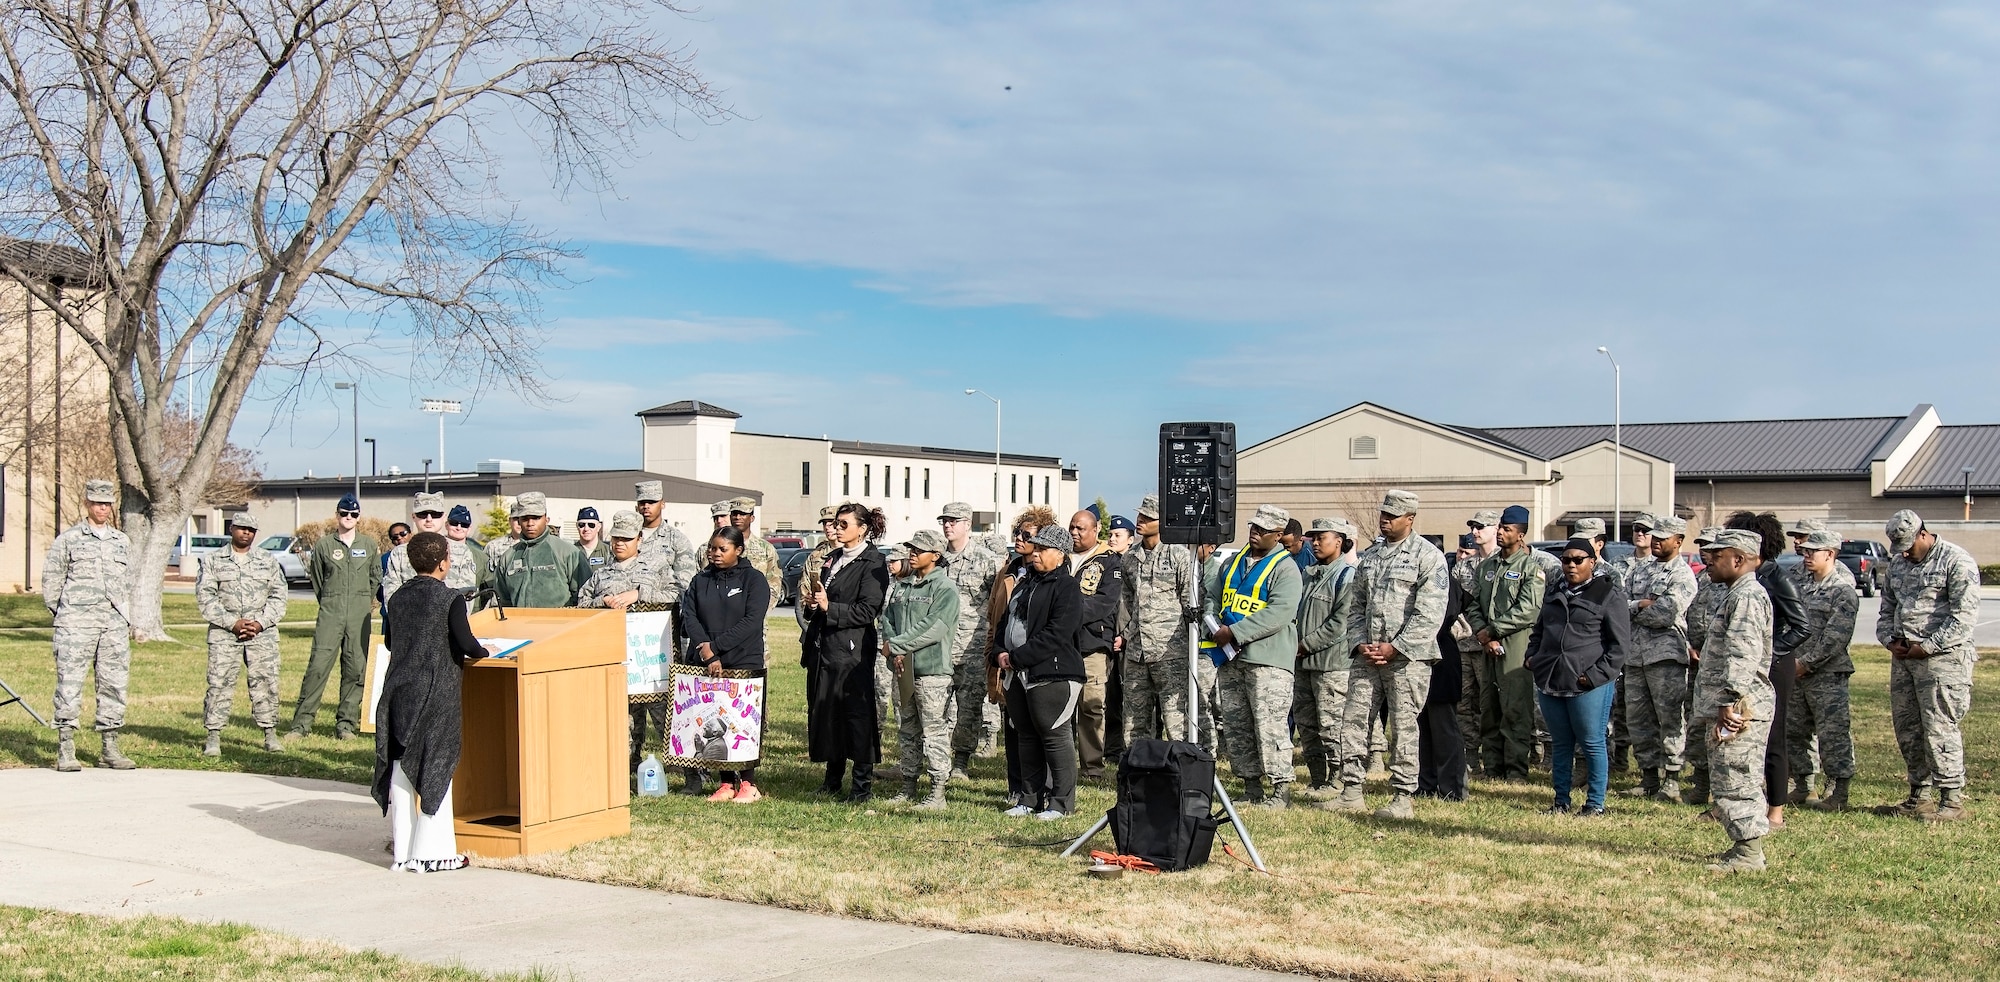 Ikira Peace, guest speaker for the Black History Month Unity Walk, speaks to attendees Feb. 28, 2018, on Dover Air Force Base, Del. The three-quarter mile Unity Walk was hosted by the African-American Heritage Committee in celebration of Black History month here at Dover AFB. (U.S. Air Force photo by Roland Balik)